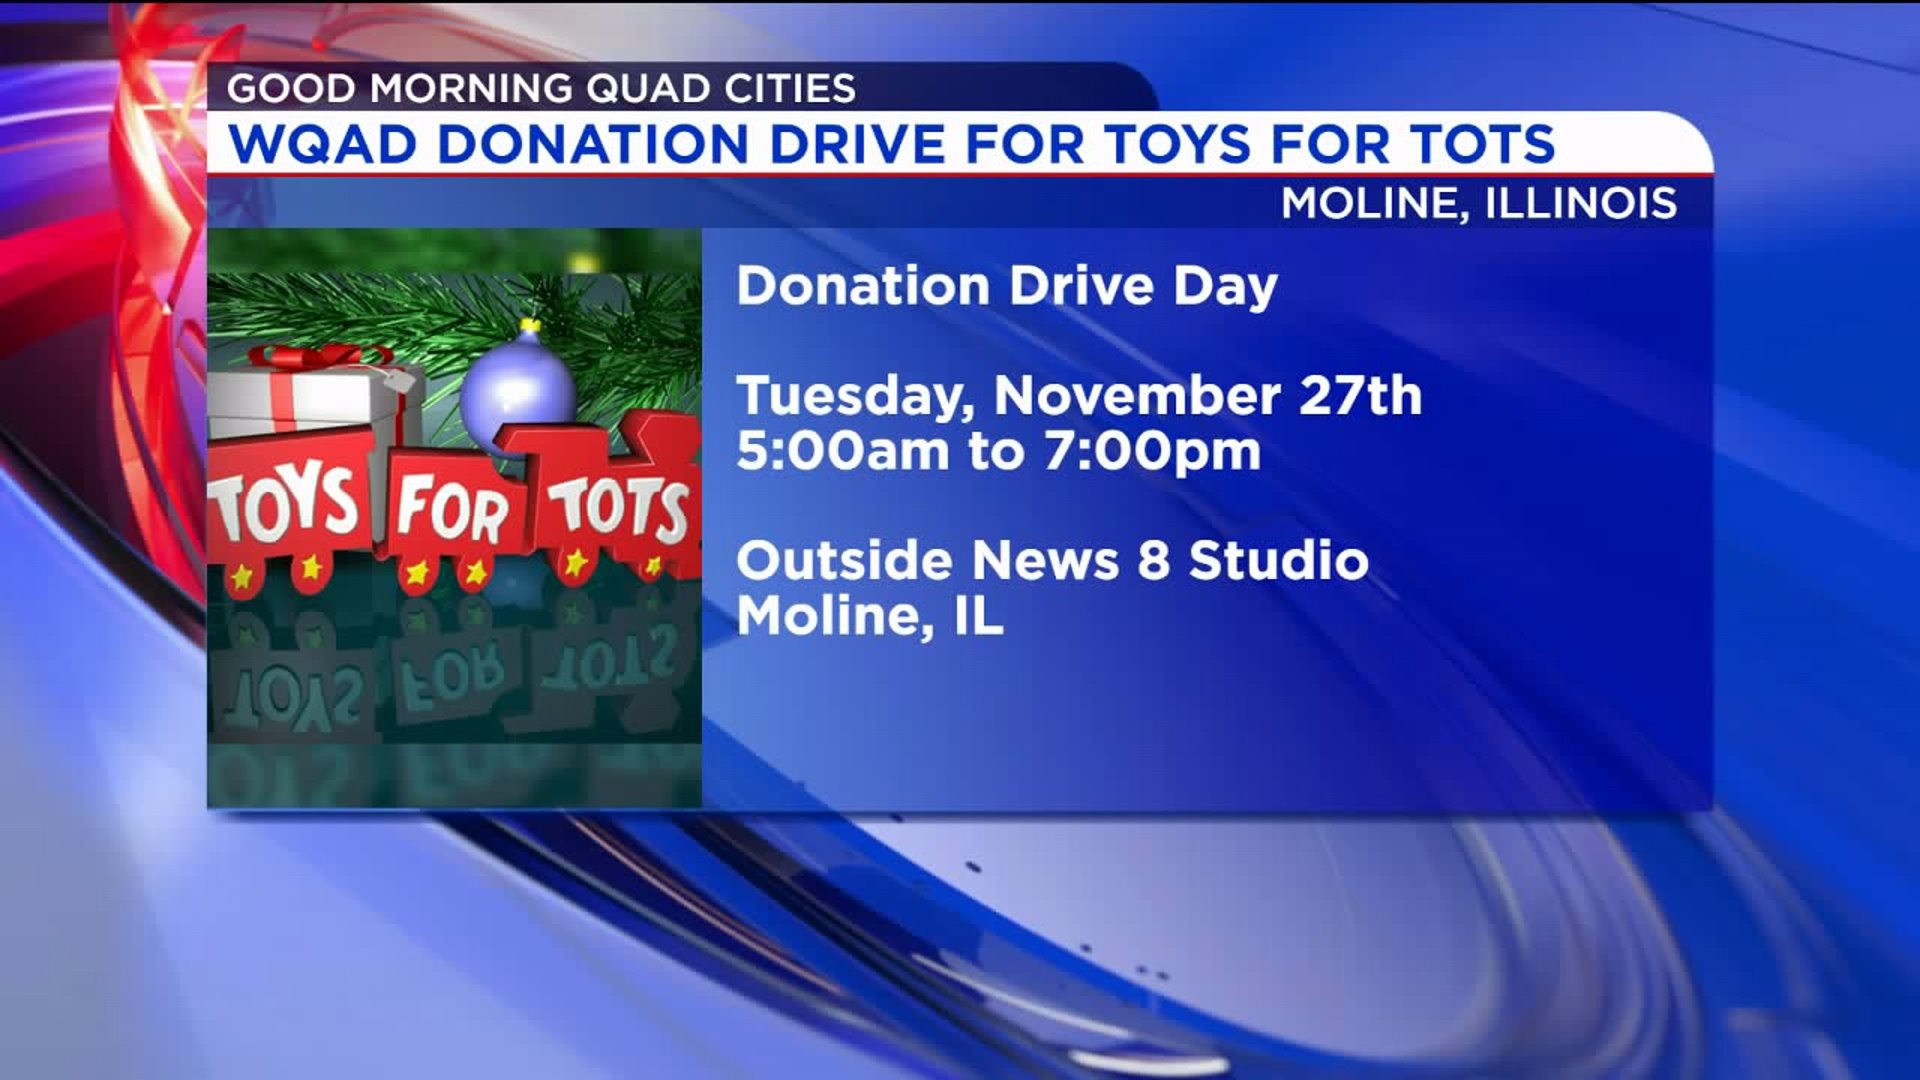 Donation Drive Day for Toys for Tots